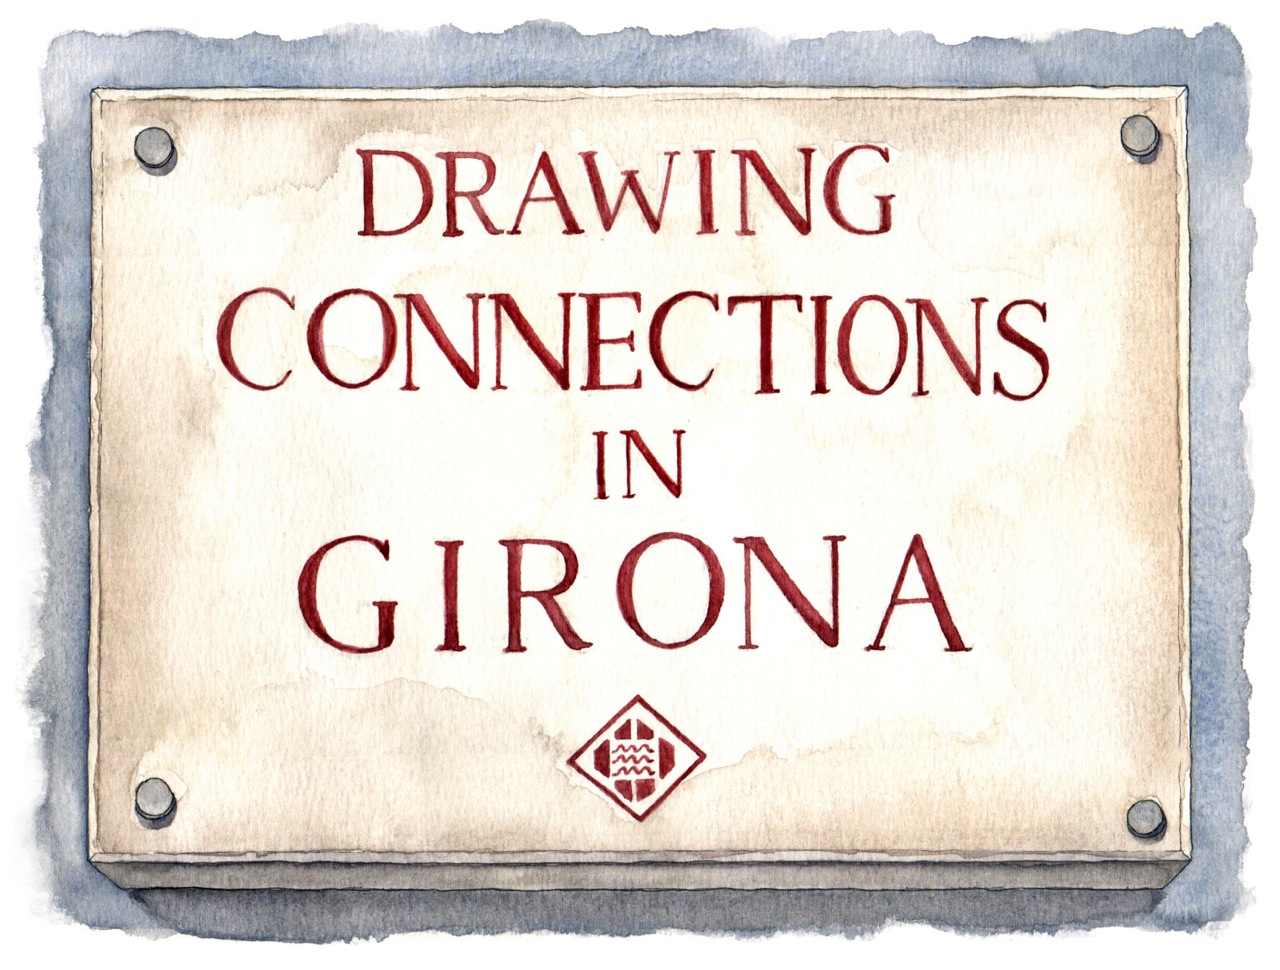 Drawing connections in Girona.